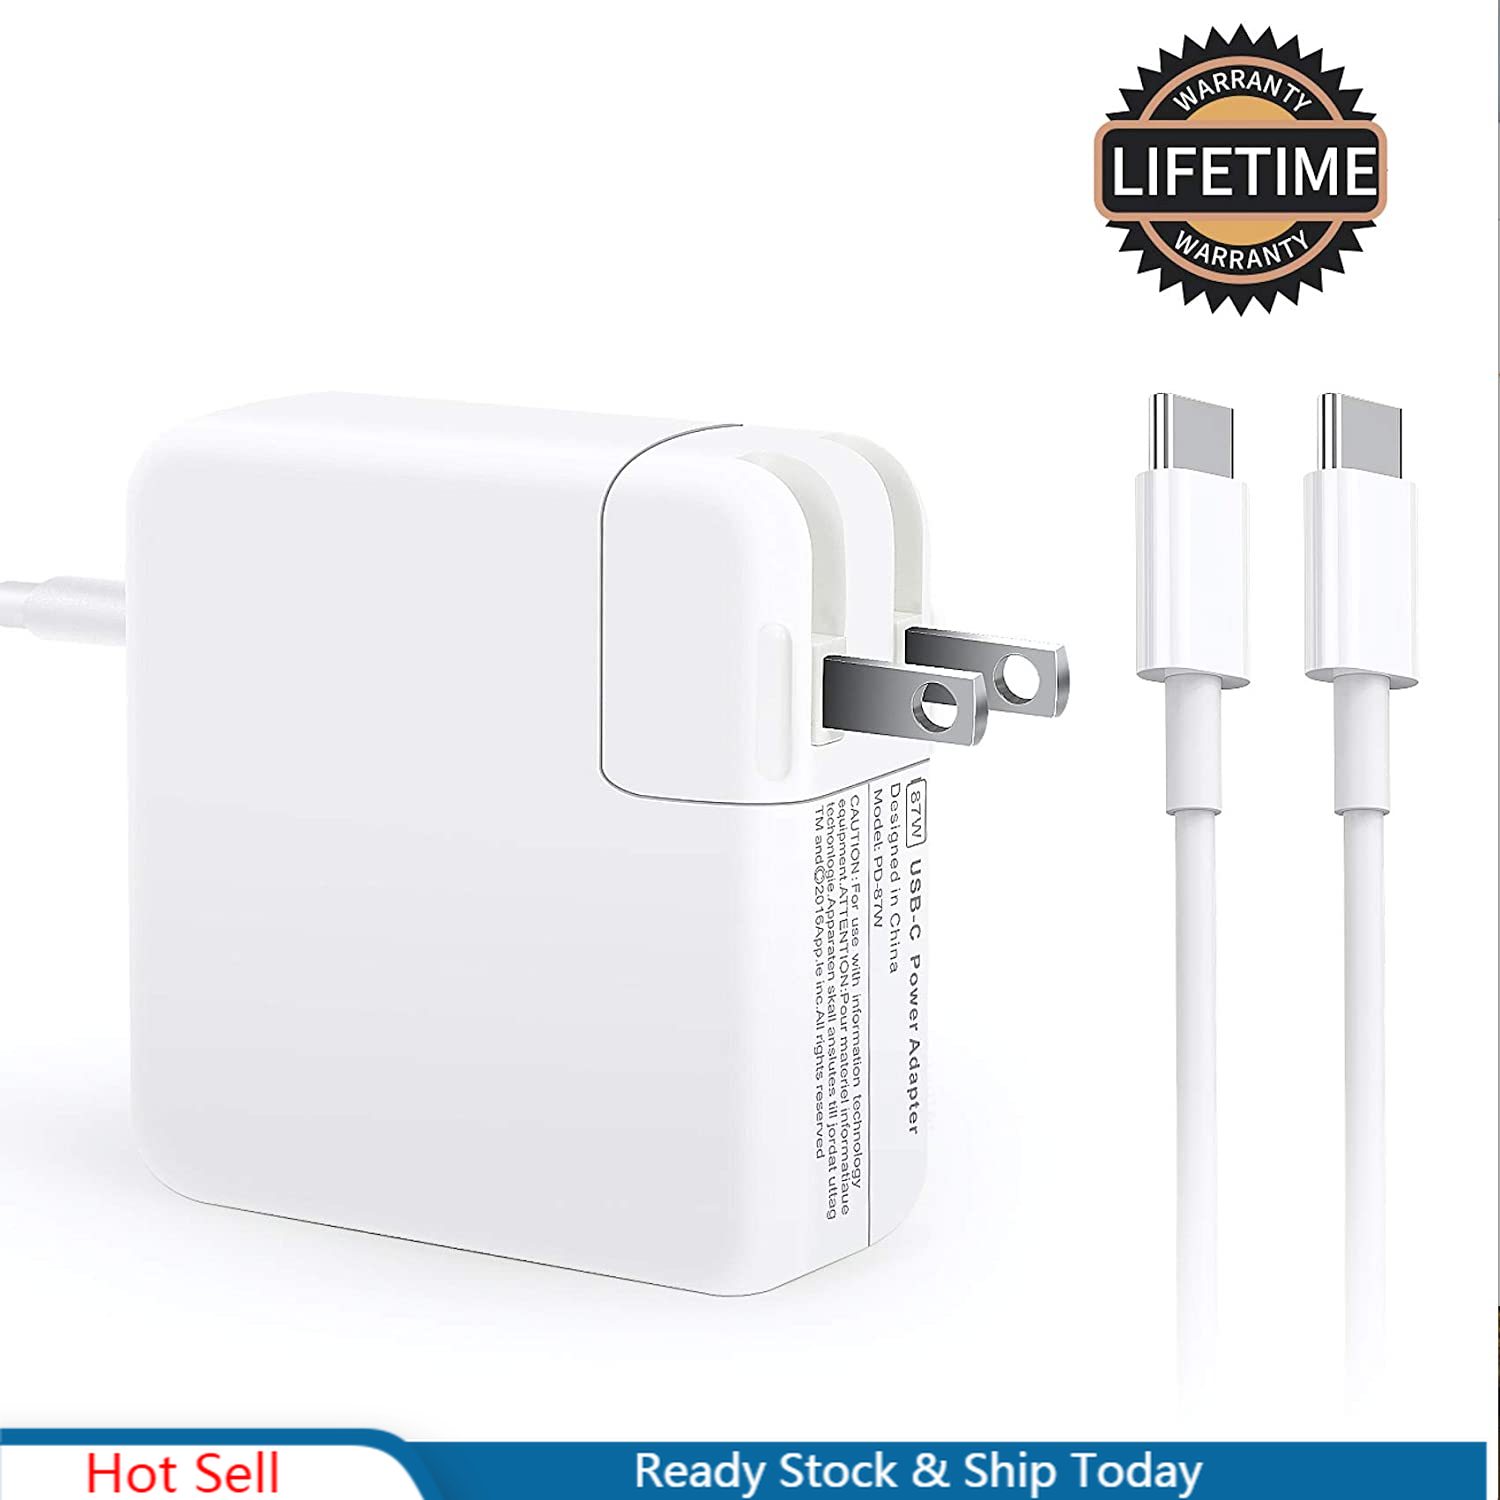 Replacement Macbook Pro Charger 87w Mac Charger Power Adapter For Macbook Pro 15 Inch 13 Inch Macbook 12 Inch Macbook Air 19 18 Ipad Pro Included Usb C To Usb C Charge Cable 6 6ft 2m Shopee